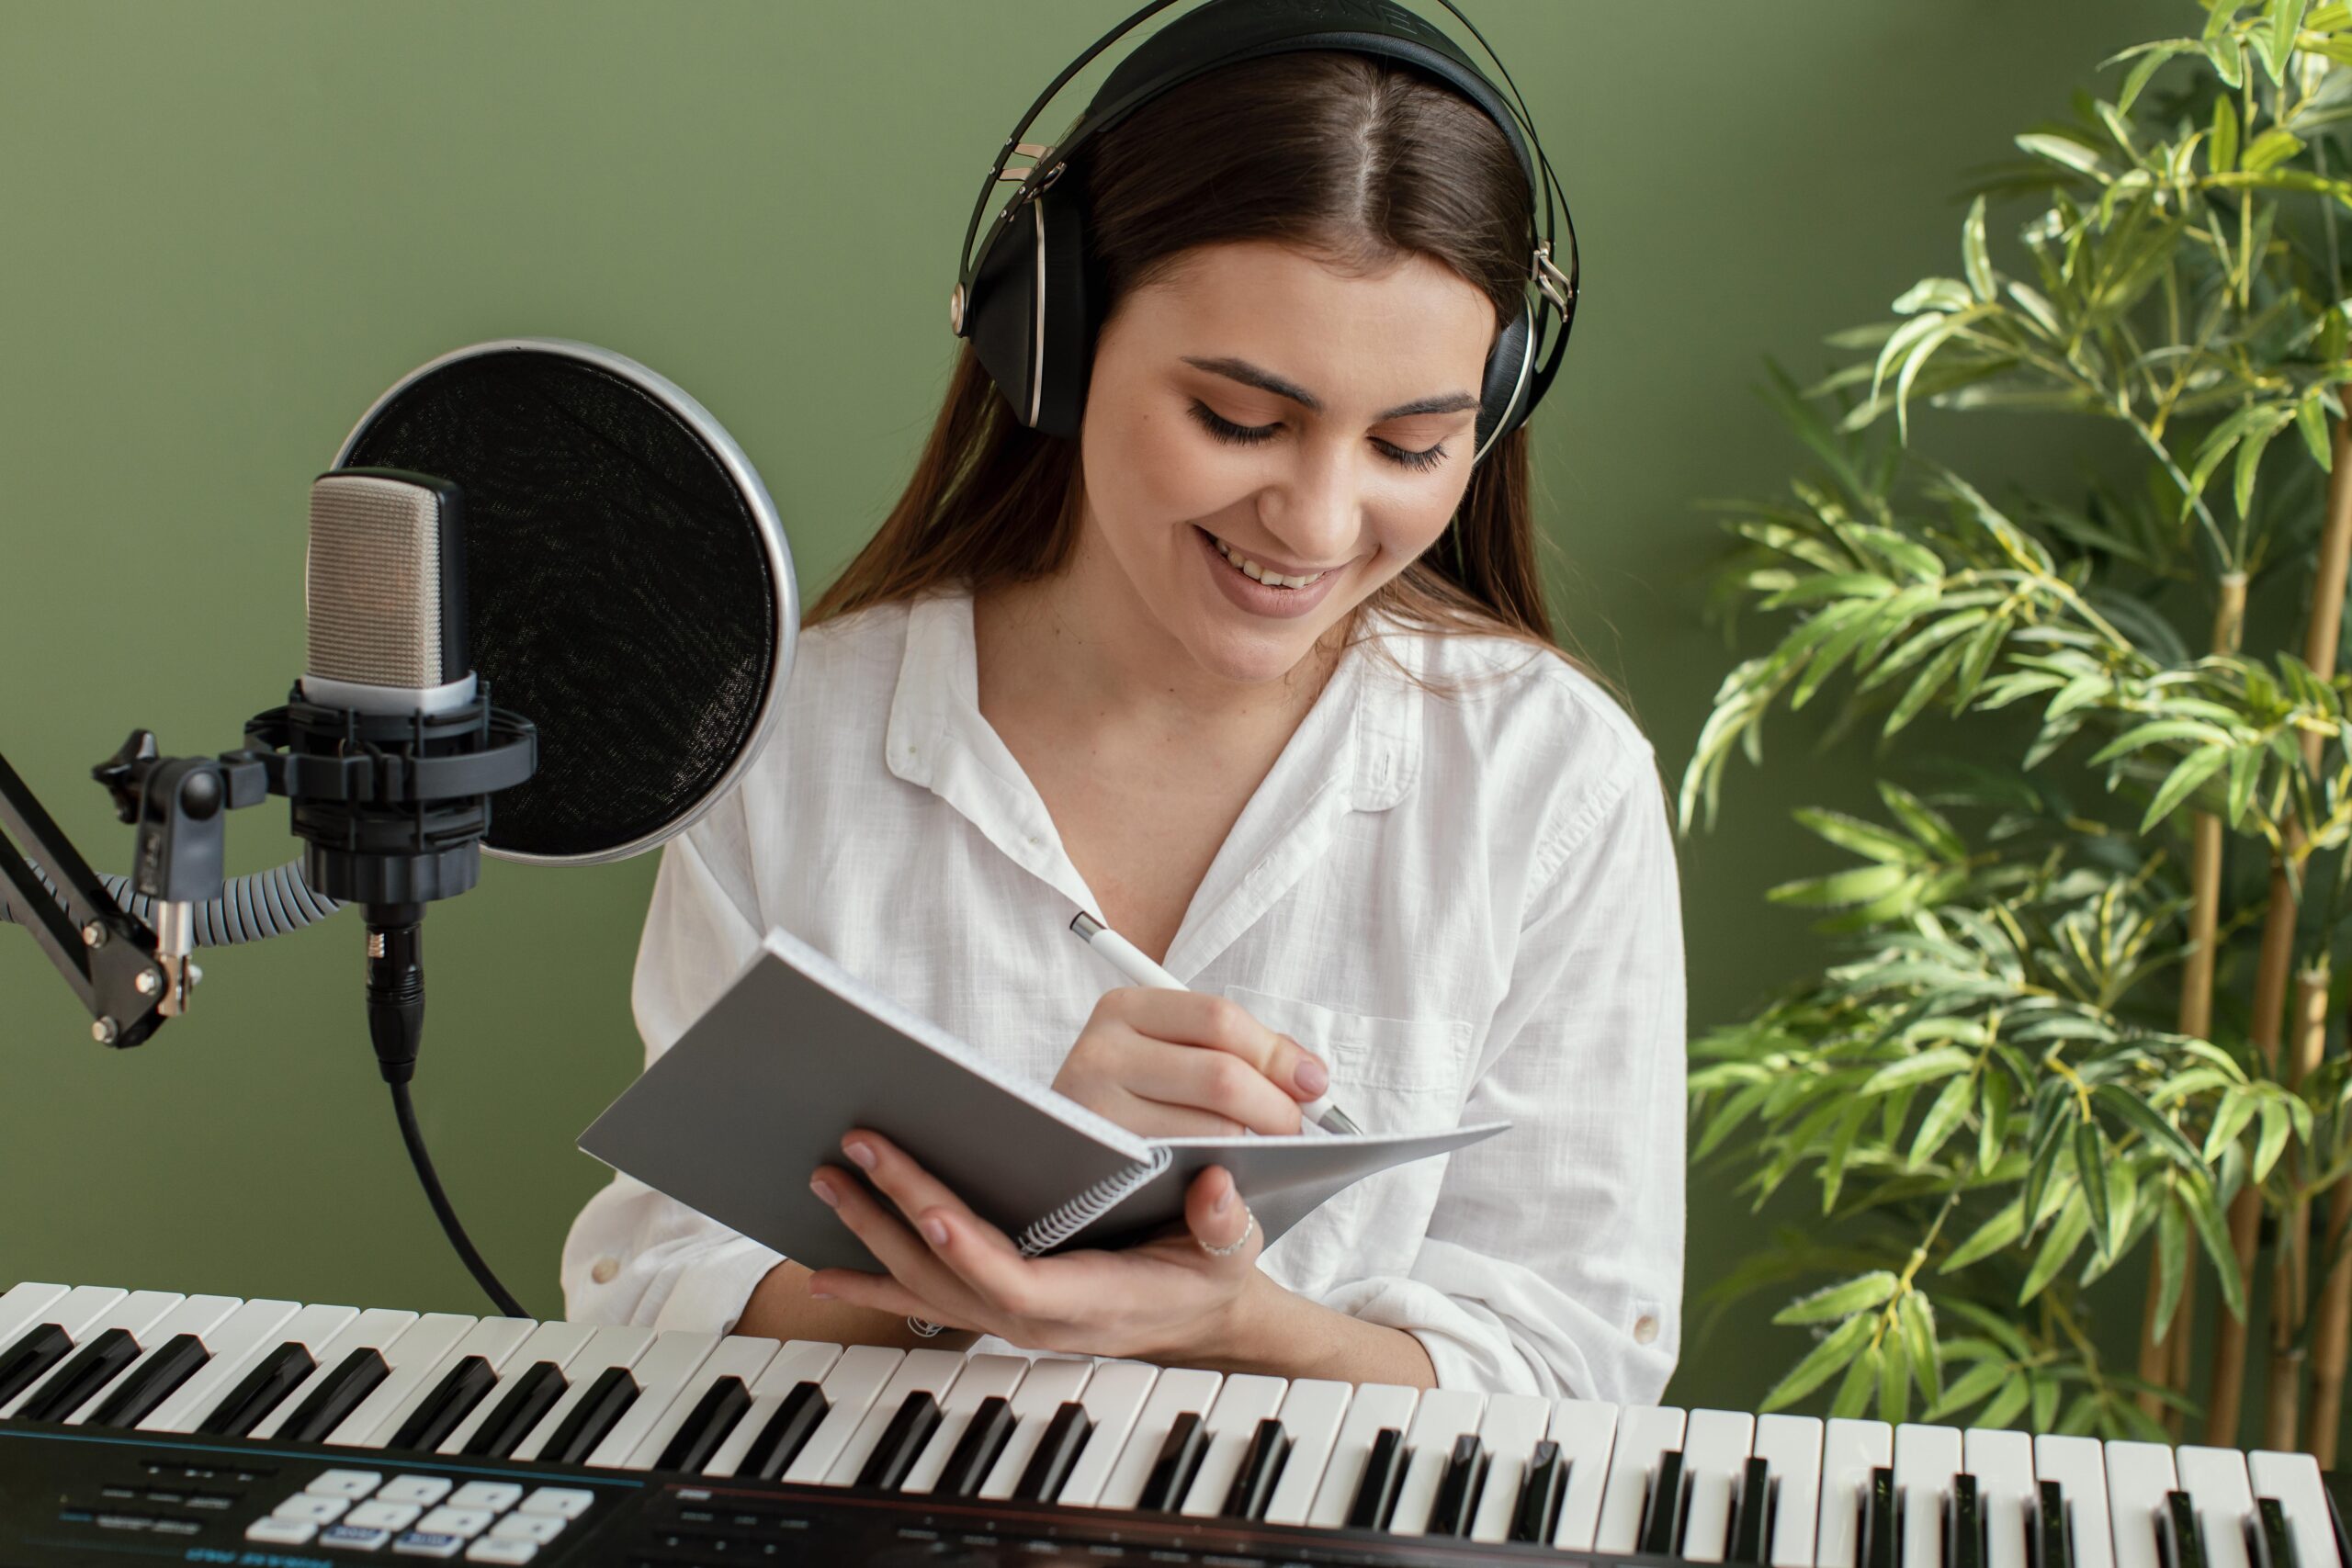 front-view-smiley-female-musician-playing-piano-keyboard-writing-songs-while-recording